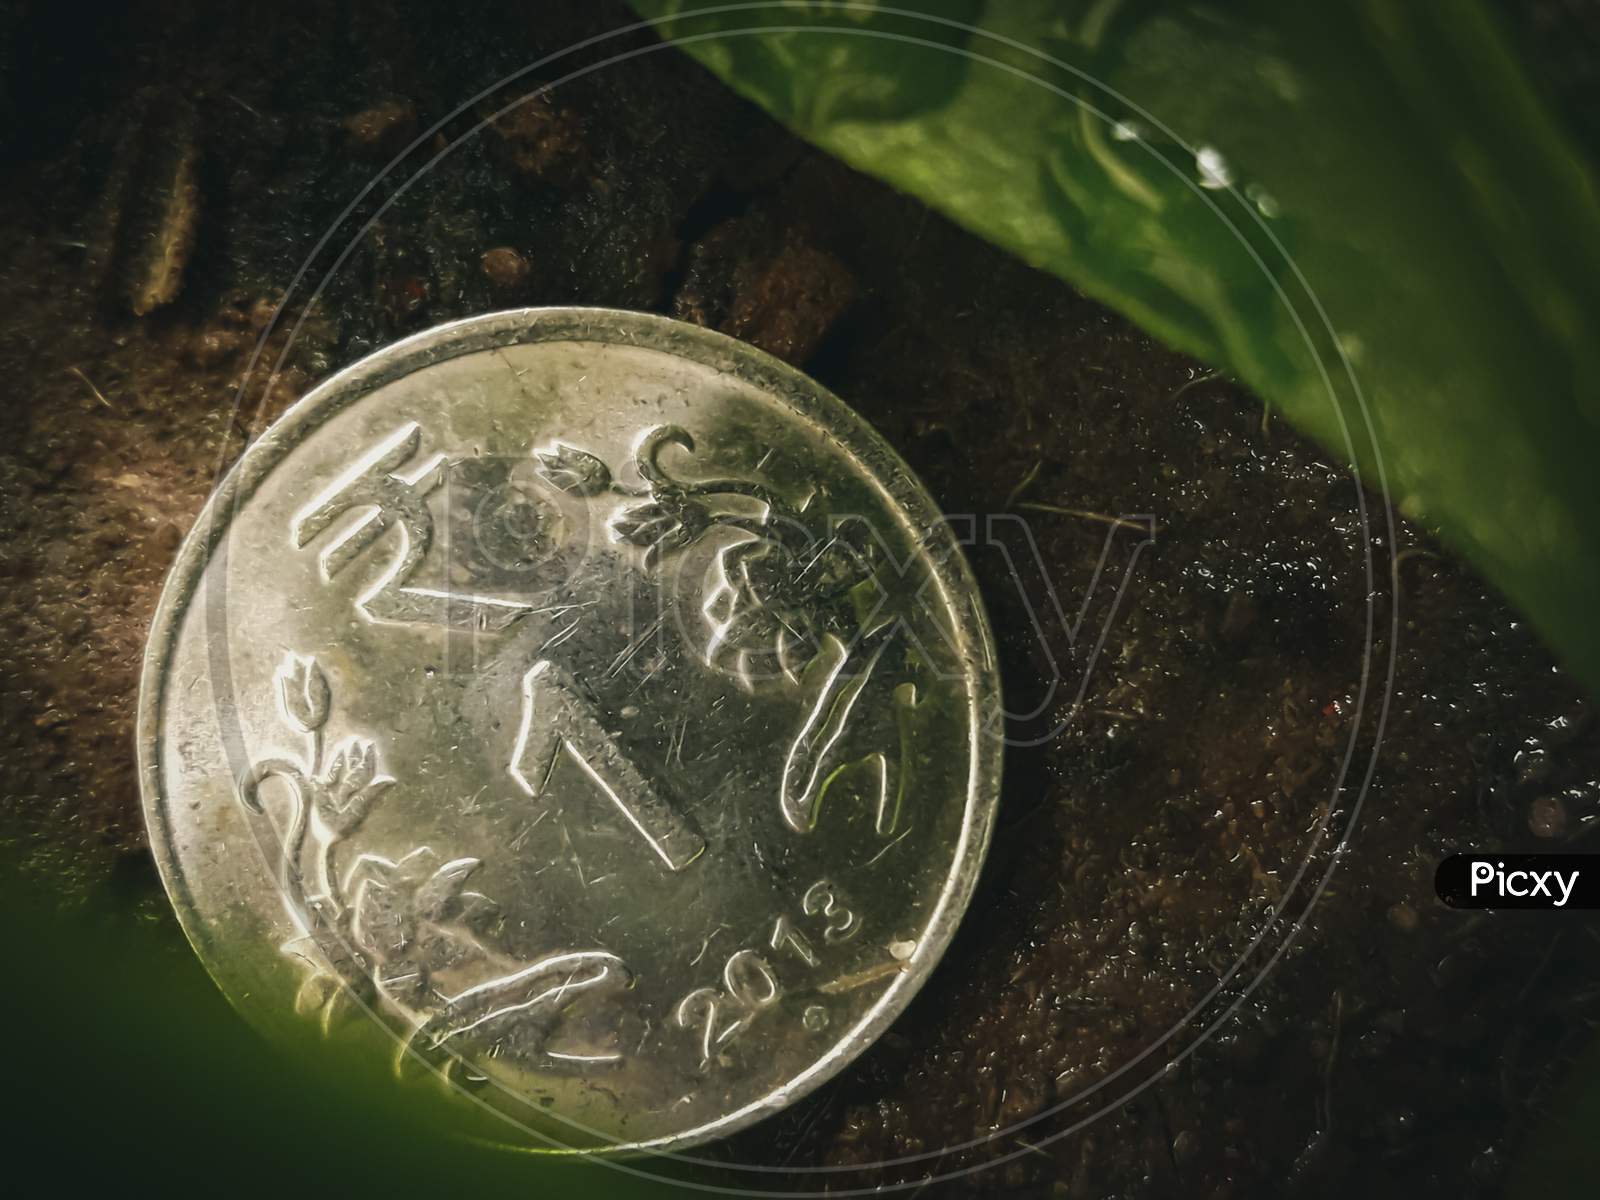 1 Rupee Coin On The Ground With A Raindrop On The Leaves